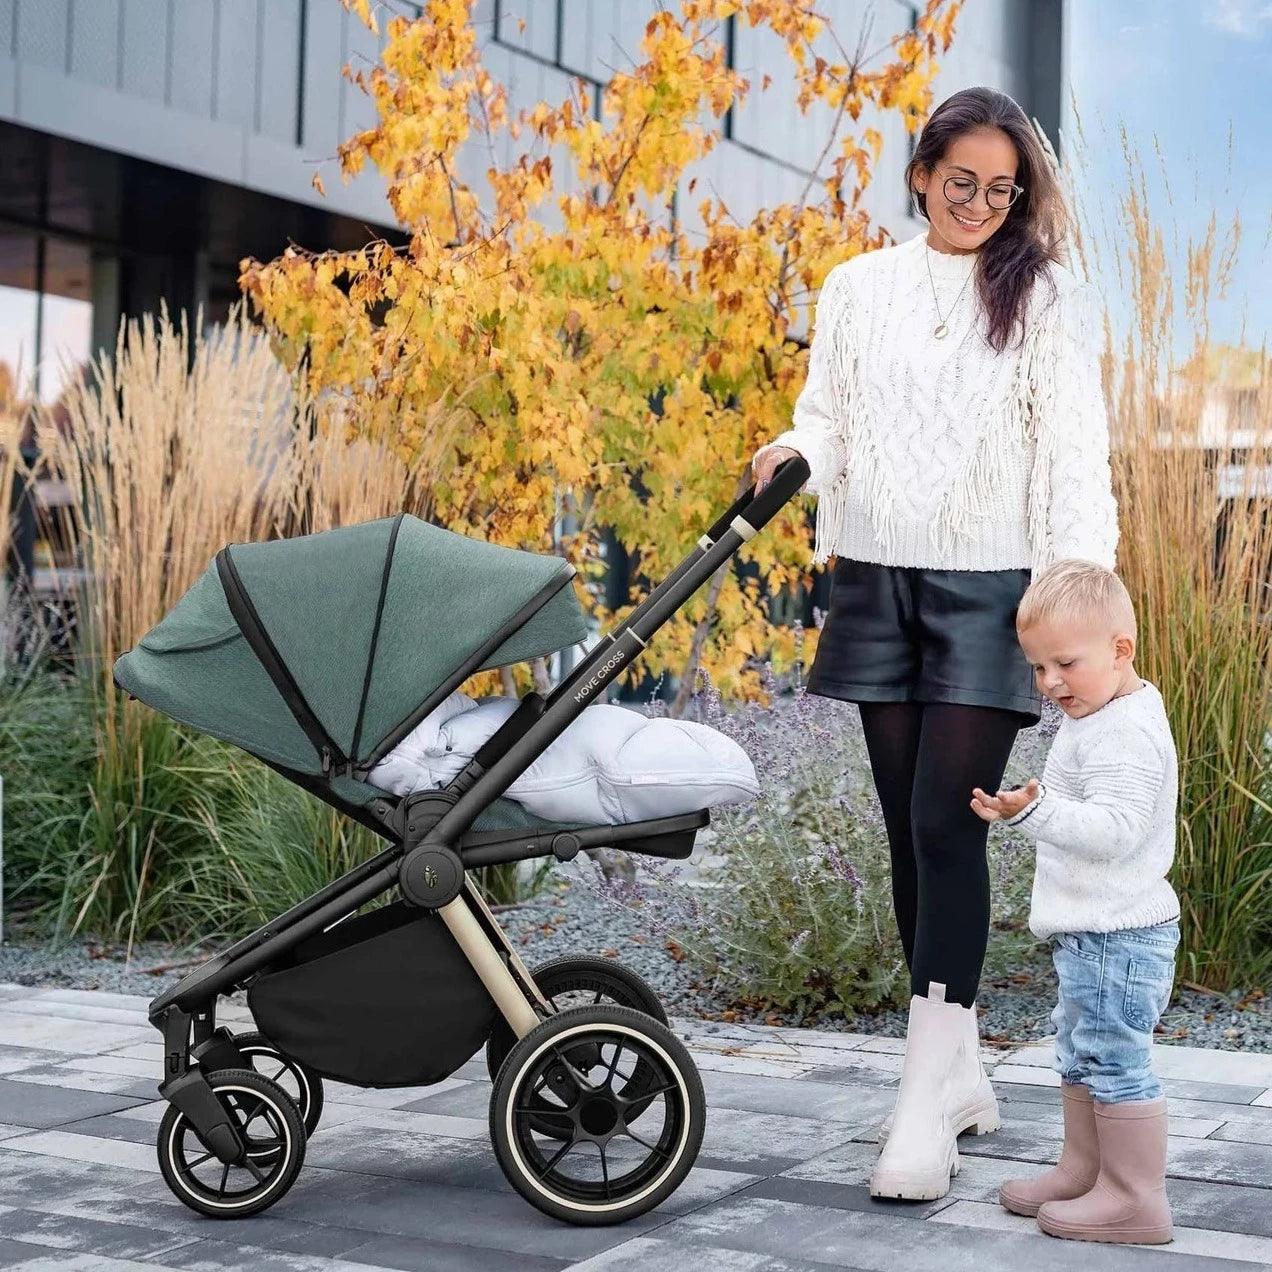 A stylish young mother stands with a Zopa Move Cross 2 stroller in parent-facing position, showcasing its luxurious Antique Green color with gold accents. She's dressed in a chic white cable knit sweater, black leather shorts, and white ankle boots, accessorized with glasses and a necklace. Next to her, a toddler in a white sweater and blue jeans looks curiously at something in his hand. They are outdoors, with vibrant autumn leaves in the background, creating a warm and fashionable family scene.